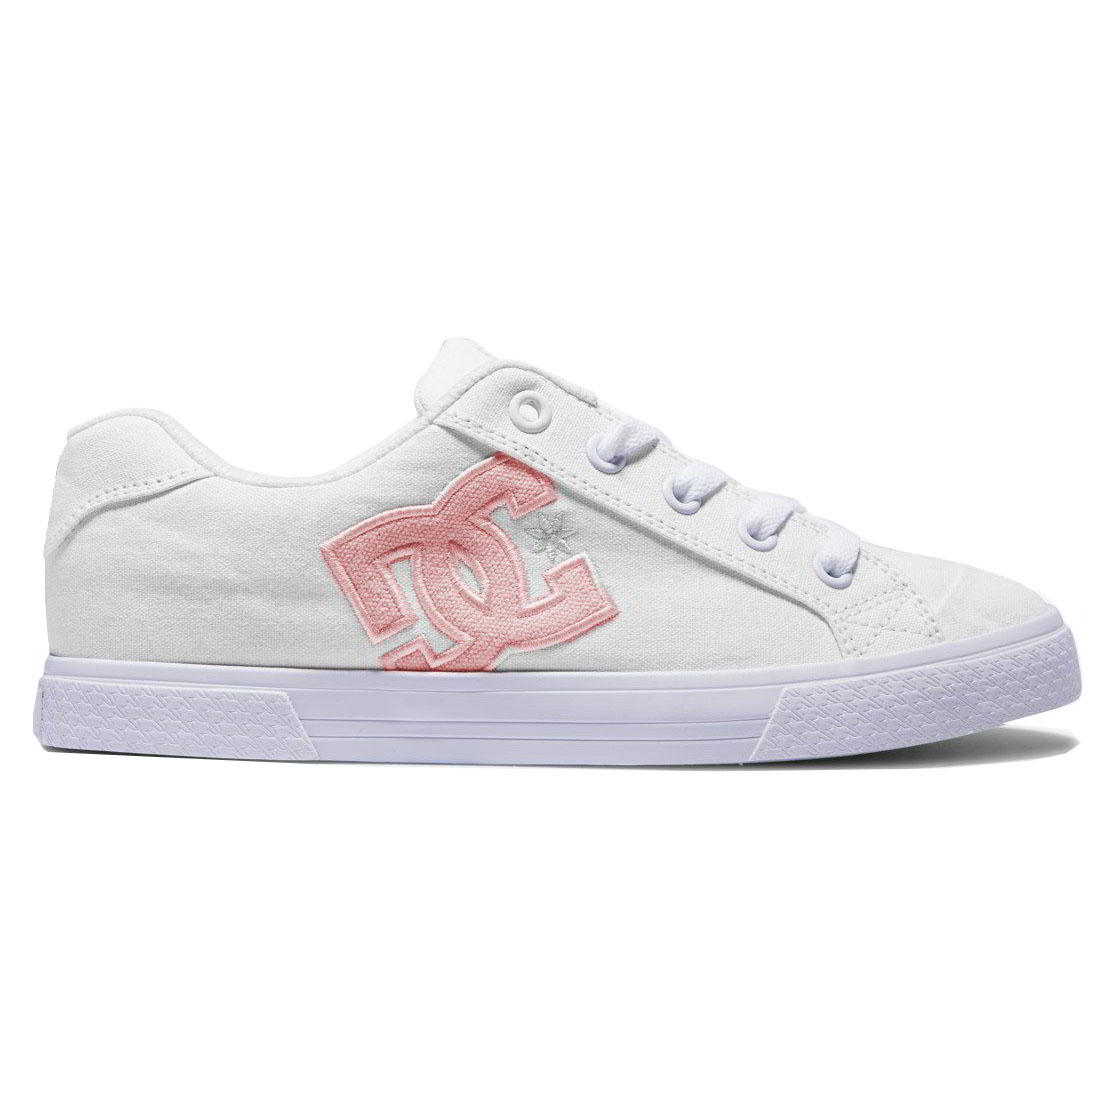 DC Womens Chelsea Skate Shoes Trainers White Pink - UK 5 2951